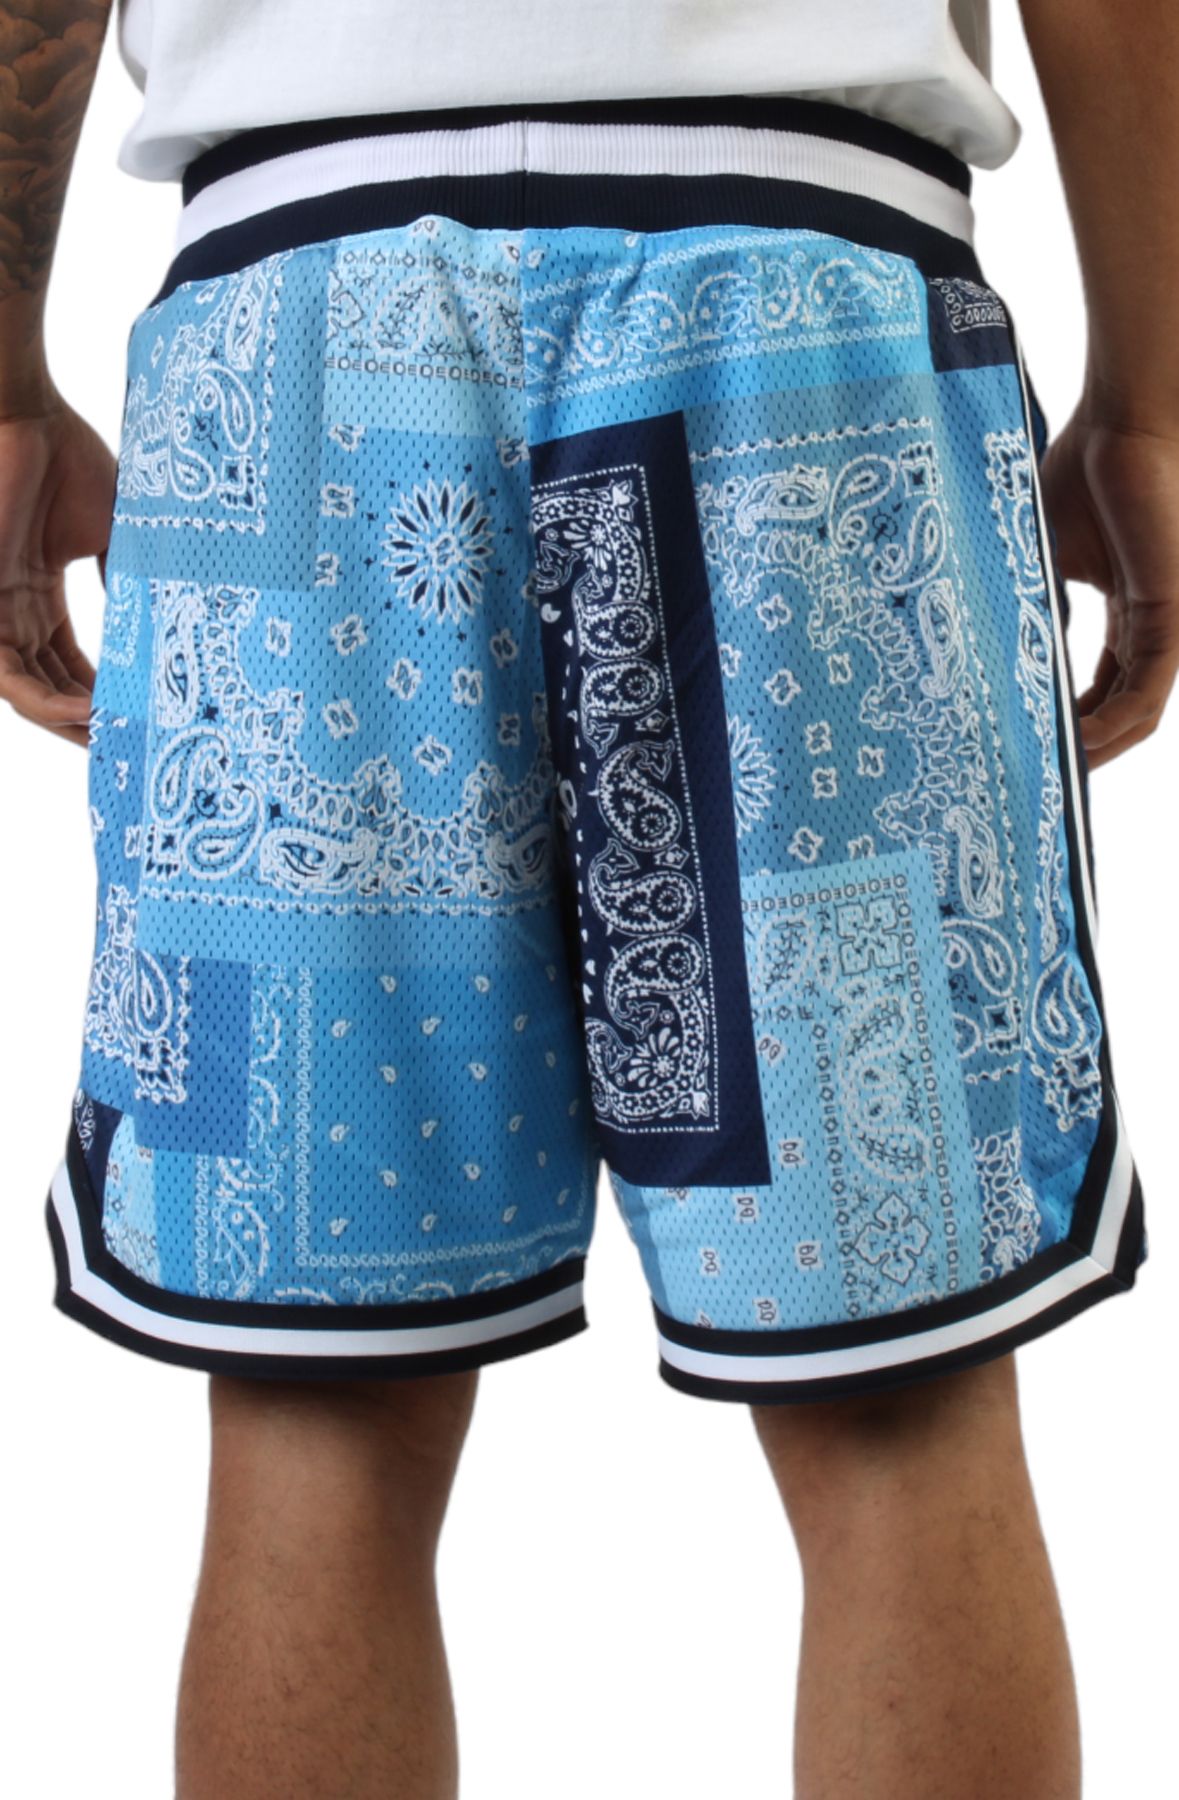 LRG Strictly Roots Mesh Shorts L1ZHMBSXX-BL62 - Shiekh